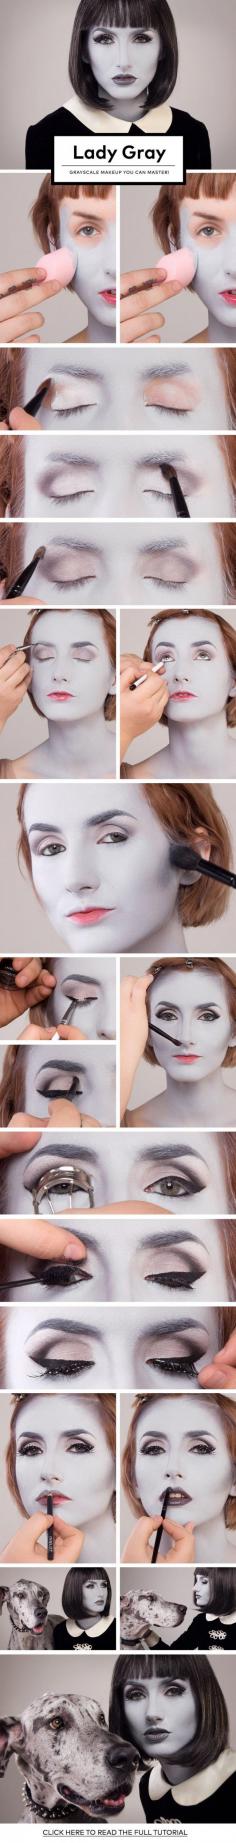 lady grey makeup tutorial; it's a halloween costume thing